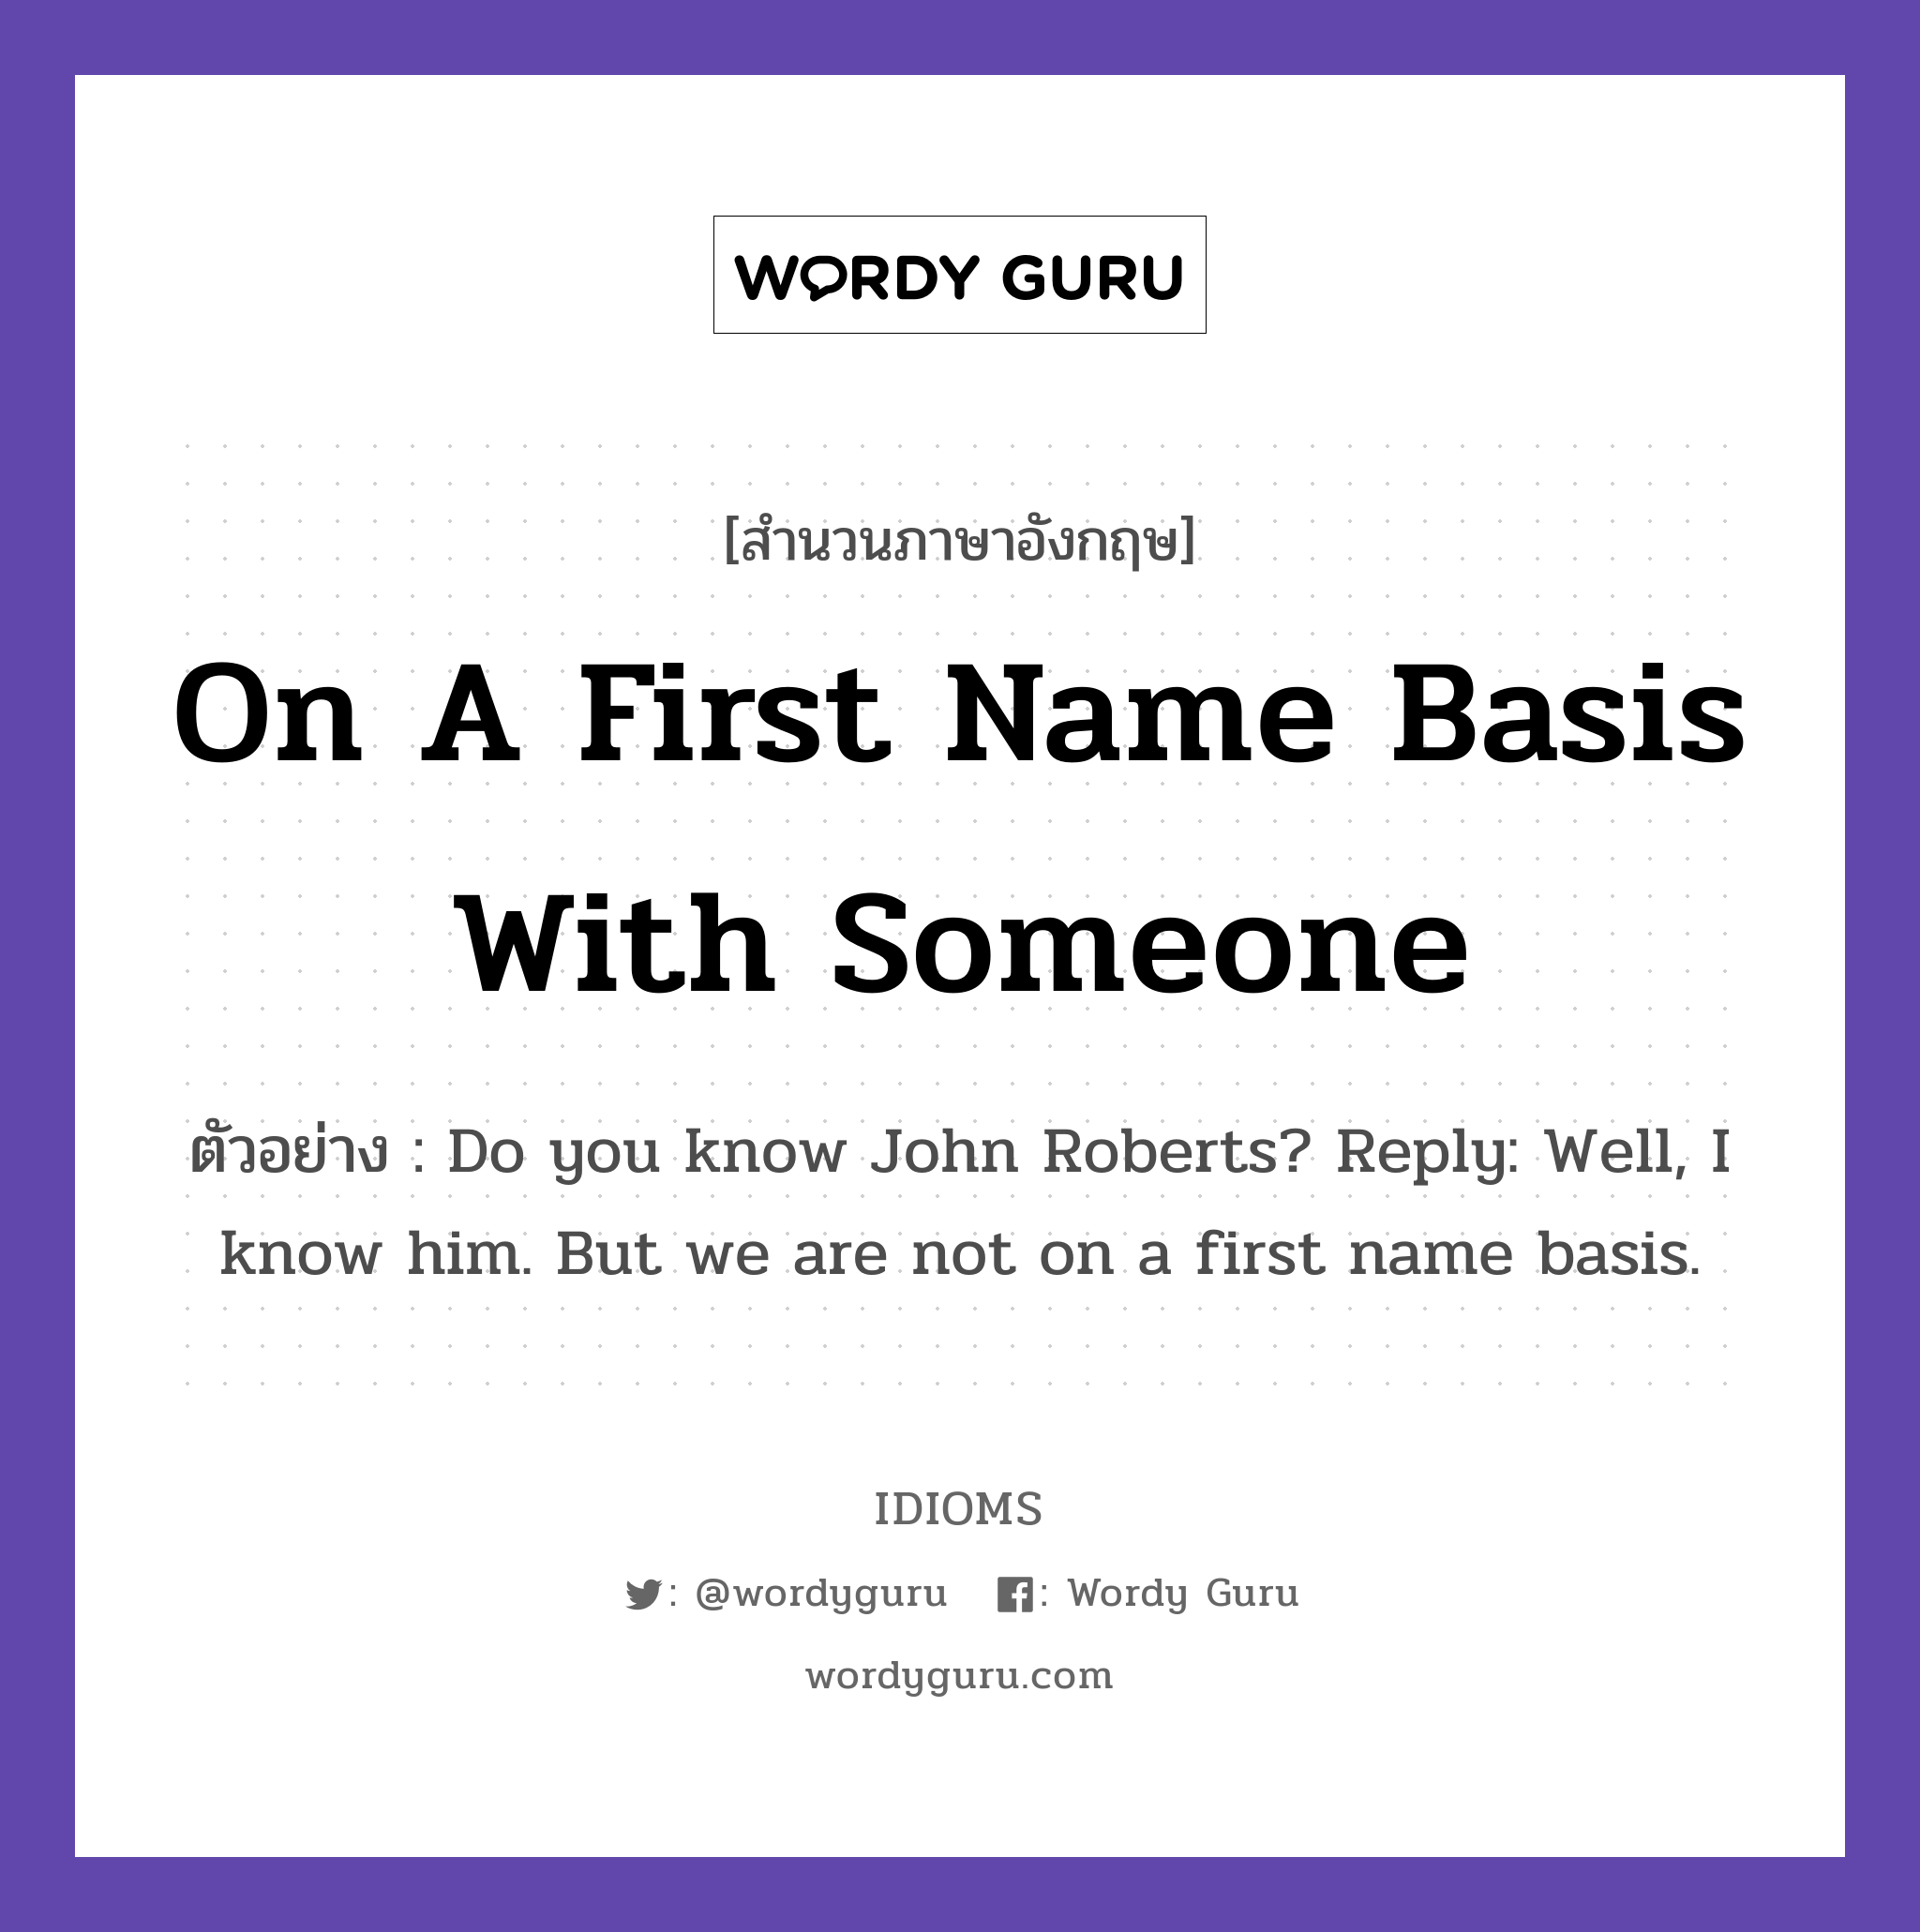 On A First Name Basis With Someone แปลว่า?, สำนวนภาษาอังกฤษ On A First Name Basis With Someone ตัวอย่าง Do you know John Roberts? Reply: Well, I know him. But we are not on a first name basis.